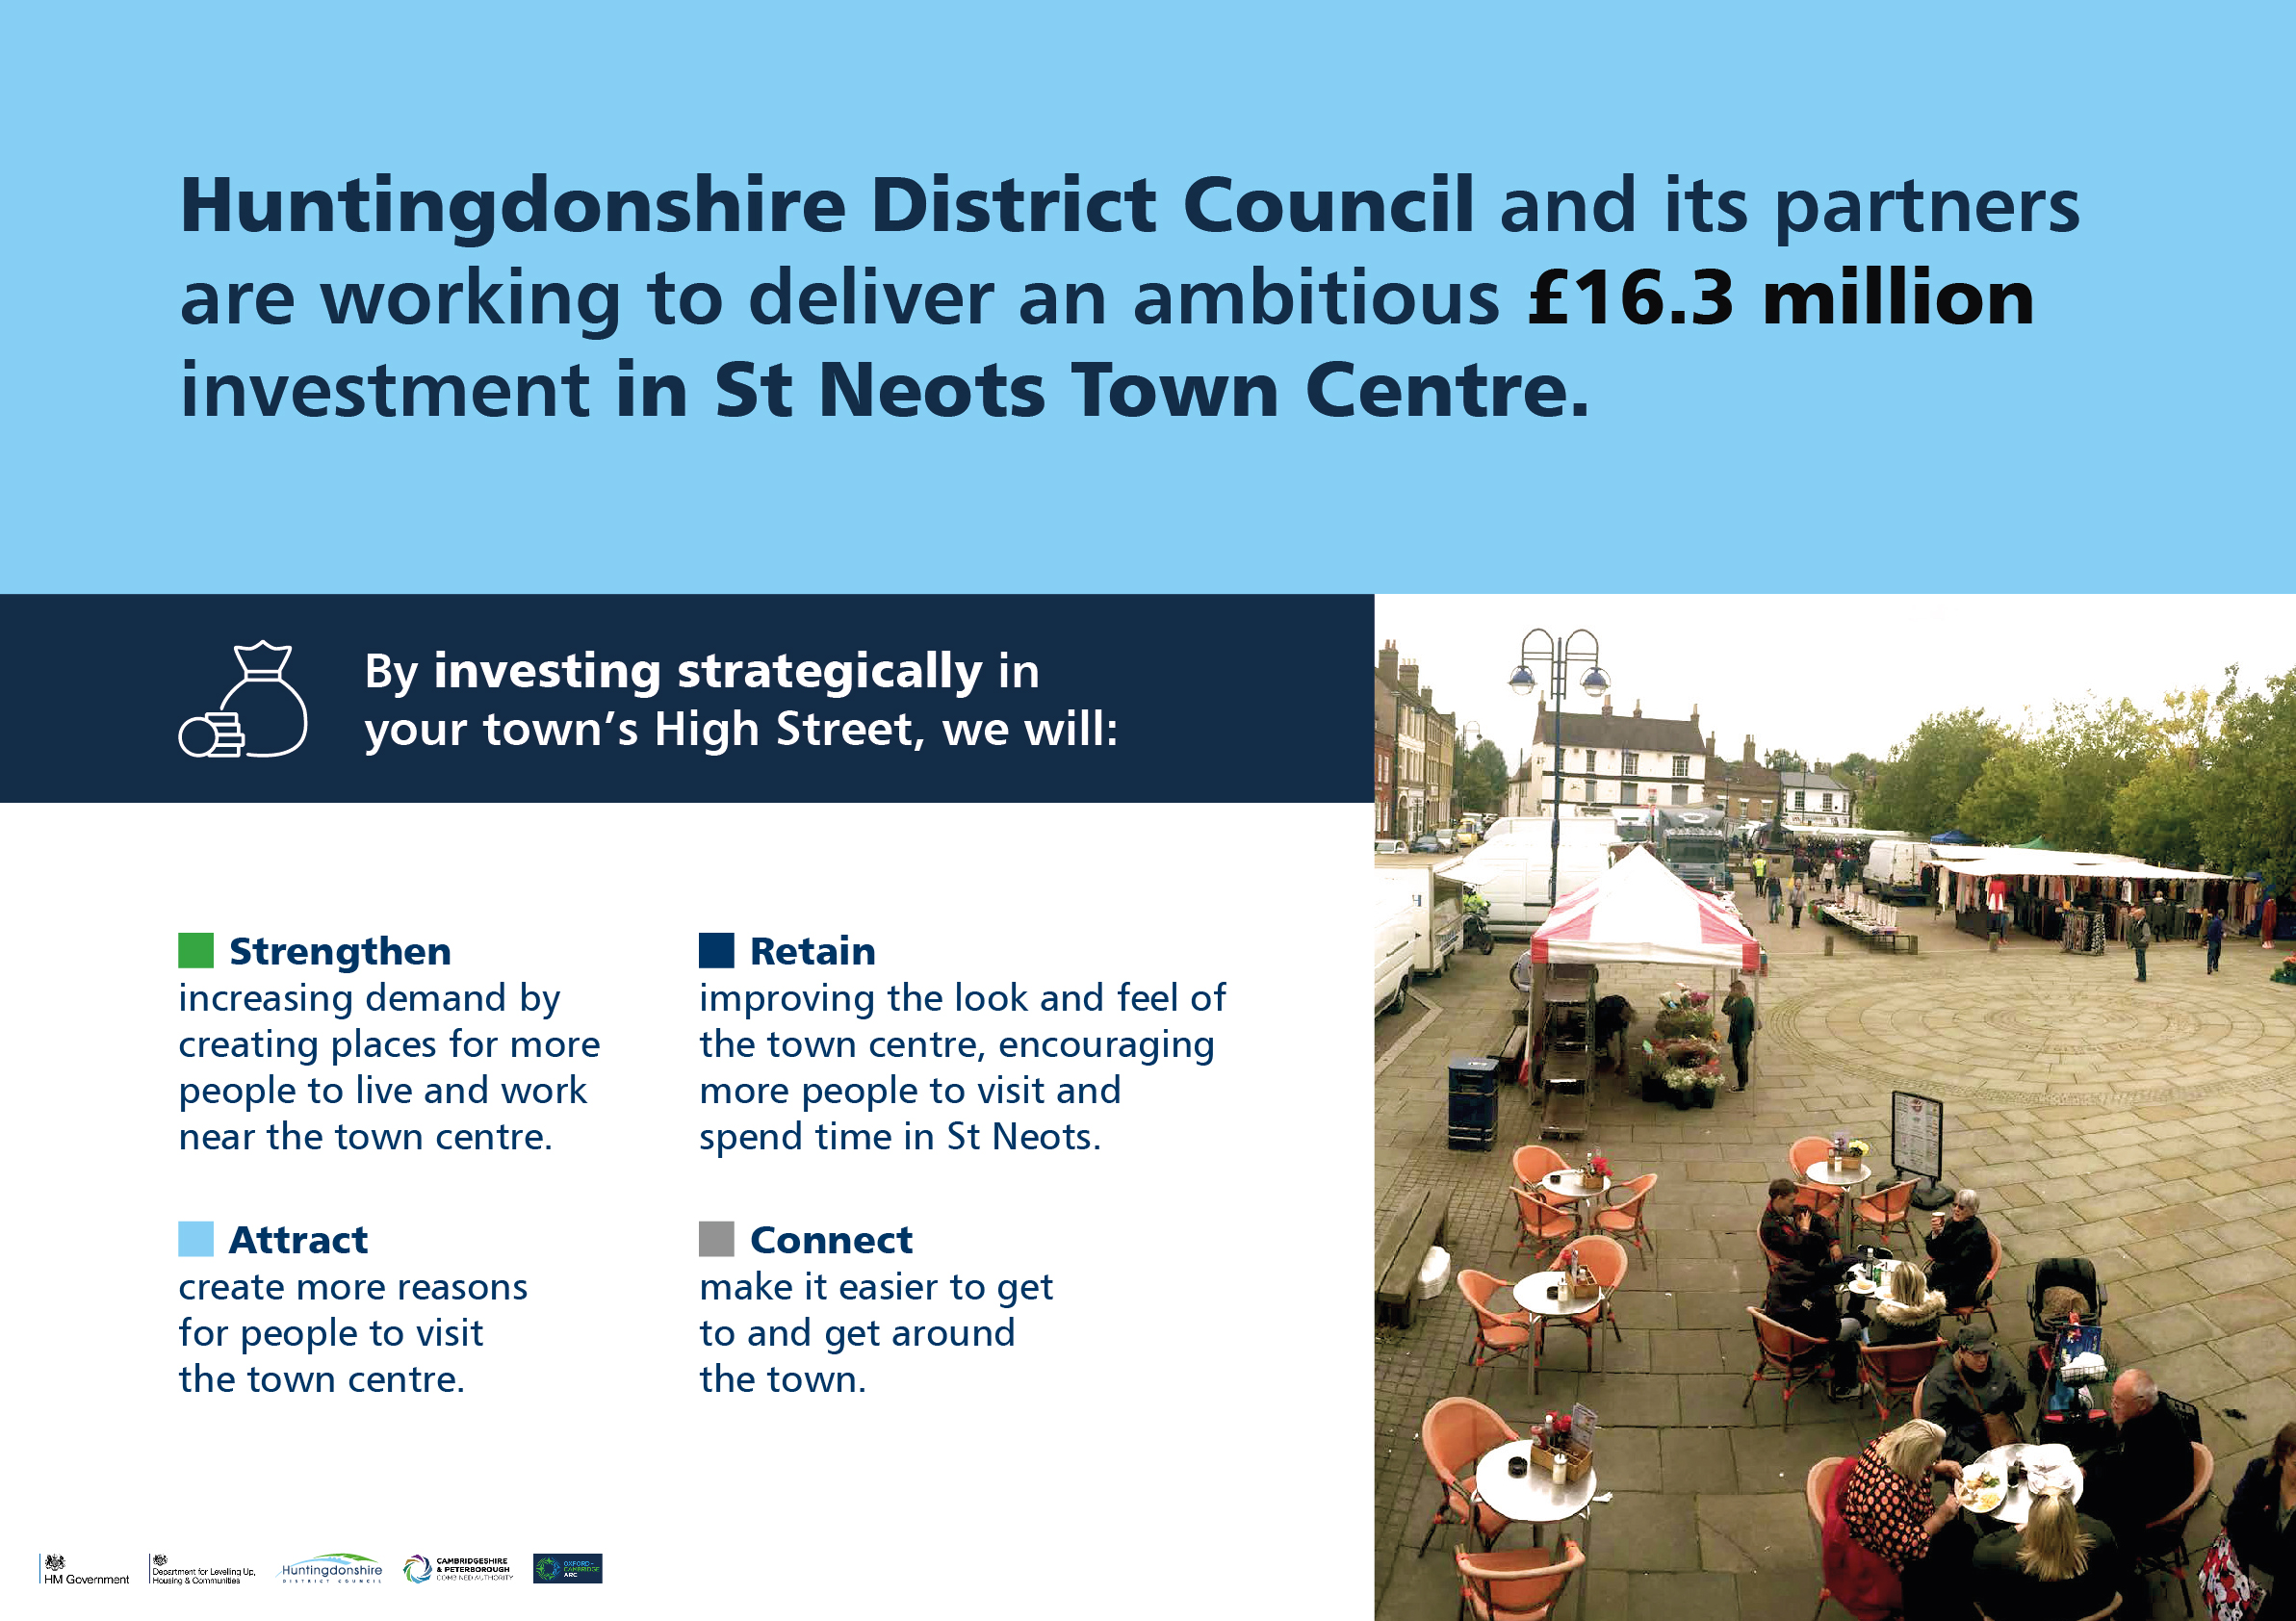 Huntingdonshire District Council and its partners are working to deliver an ambitious £16.3 million investment in St Neots town centre. By investing strategically in your town’s High Street we will: Strengthen by increasing demand by creating places for more people to live and work near the town centre. Attract by creating more reasons for people to visit the town centre. Retain by improving the look and feel of the town centre, encouraging more people to visit and spend time in St Neots. Connect by making it easier to get to and around the town.